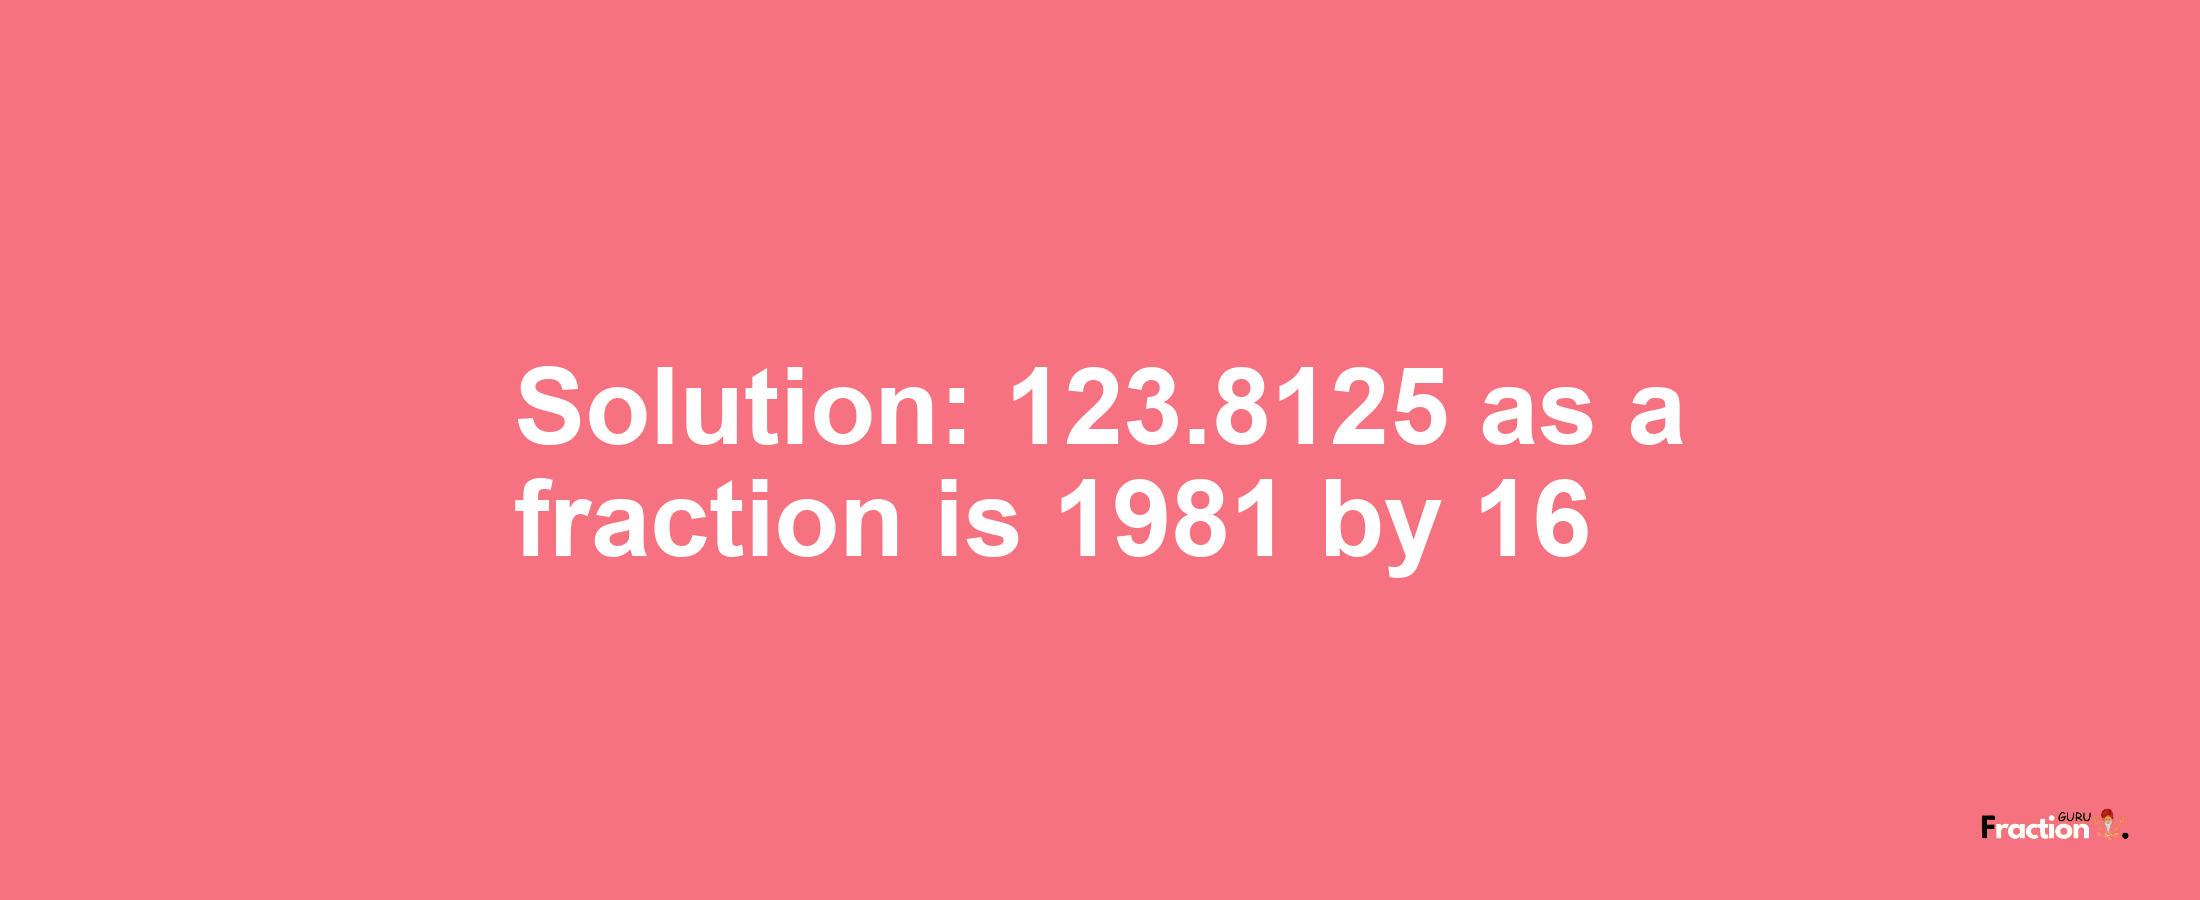 Solution:123.8125 as a fraction is 1981/16